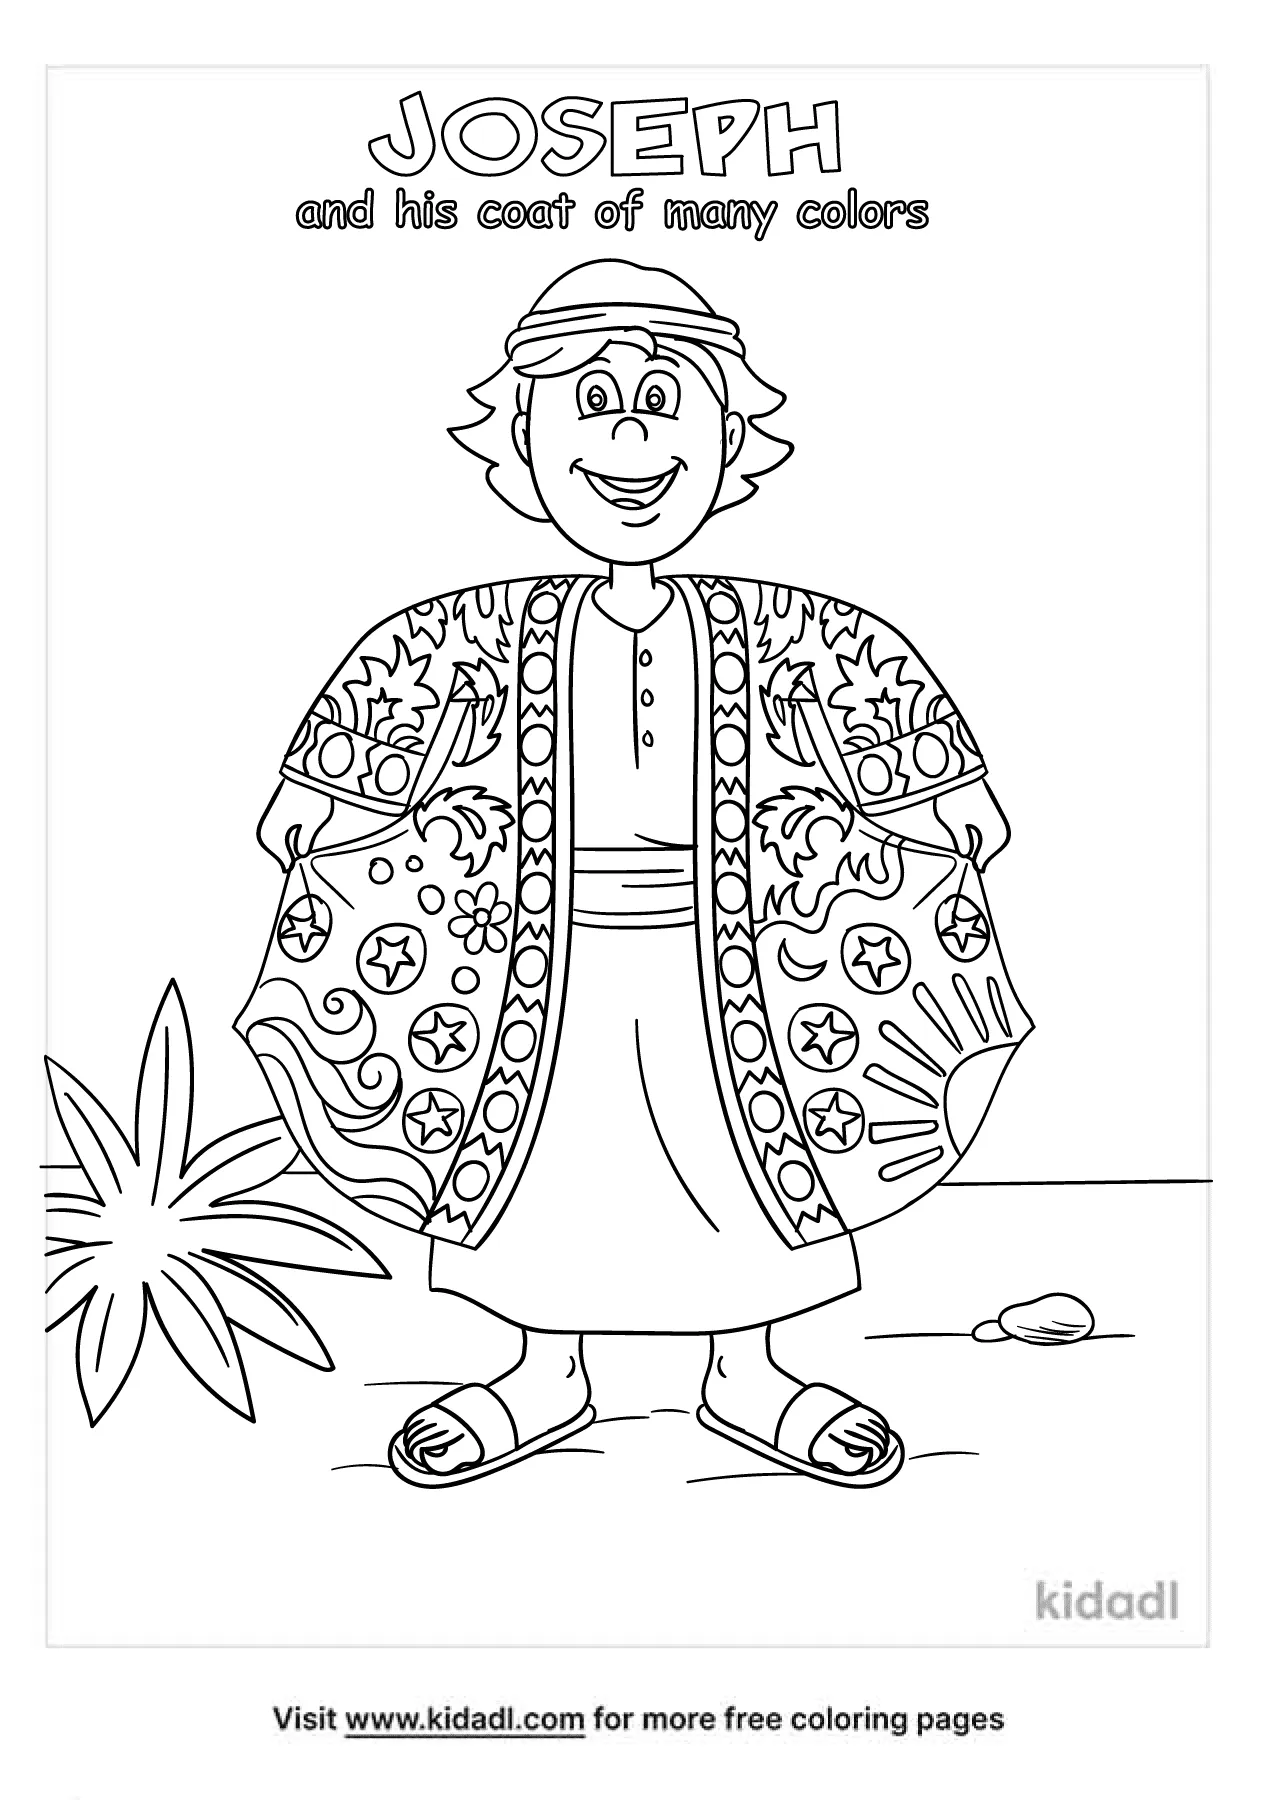 Joseph Coloring Page | vlr.eng.br